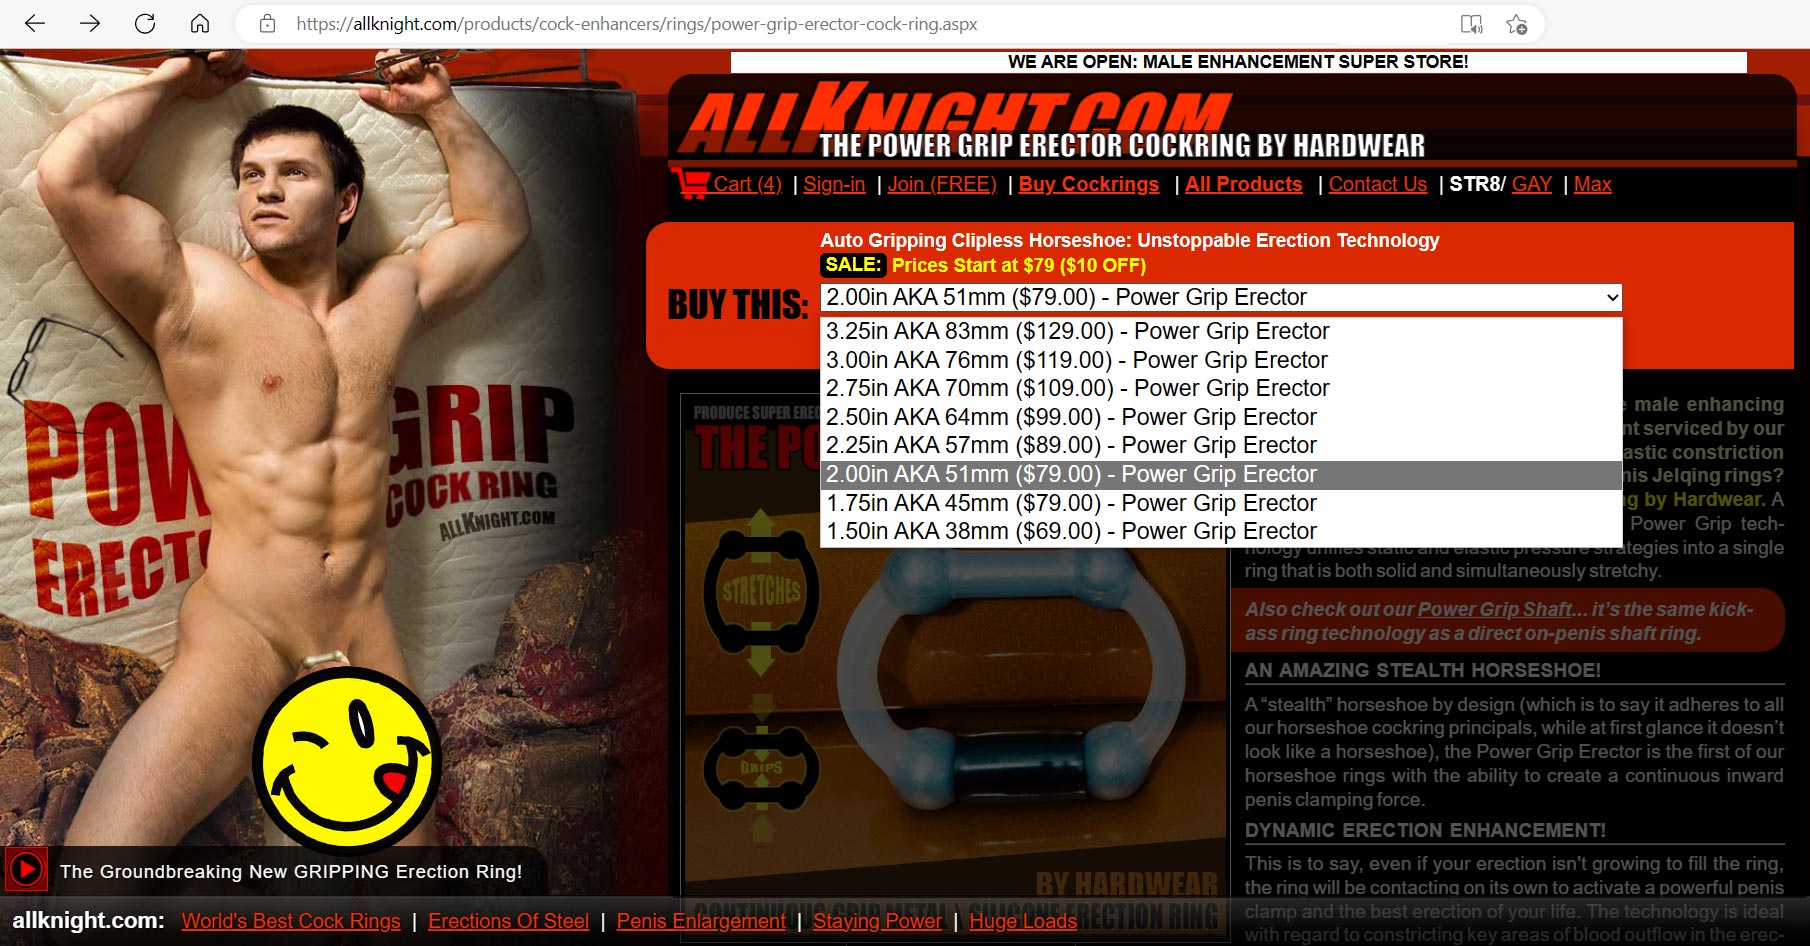 Unlock the full power of your male organ at allknight.com, home of the best penis rings in the world. With more size options than any one else in the business, it's no wonder that allknight.com is the premier Male Enhancement Super Store.